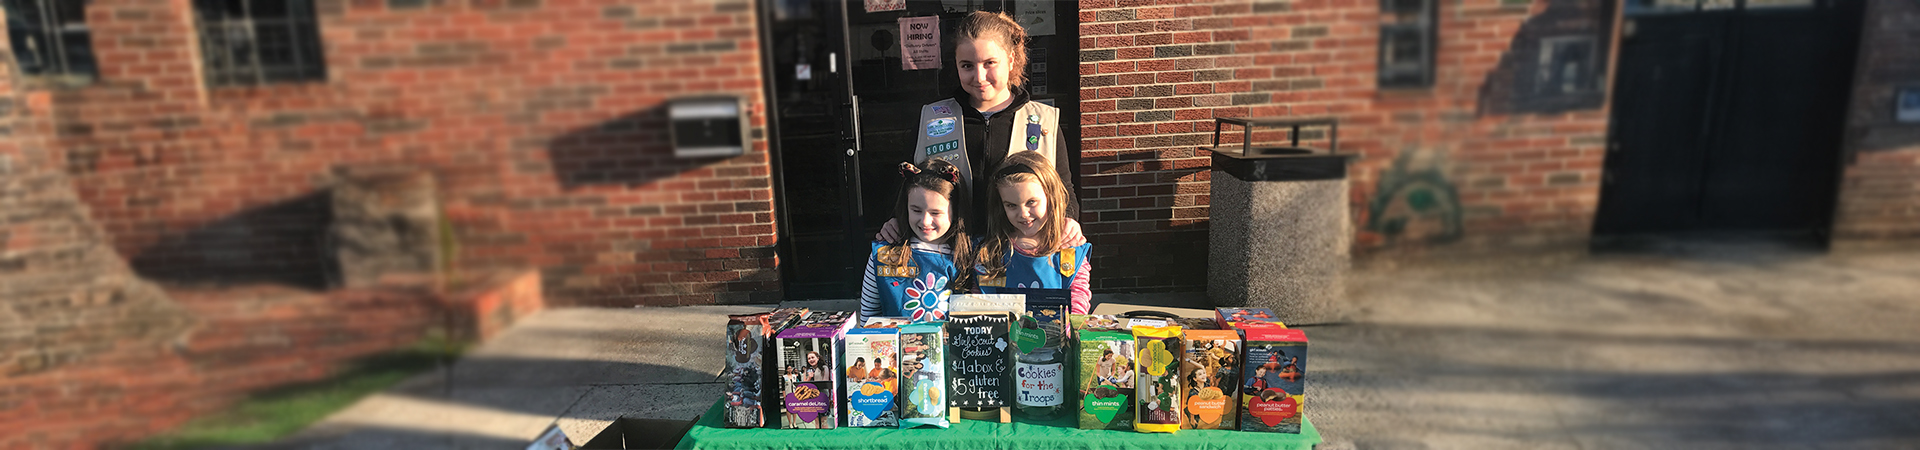  A Cadette Girl Scout posing with two Daisies at a cookie booth 